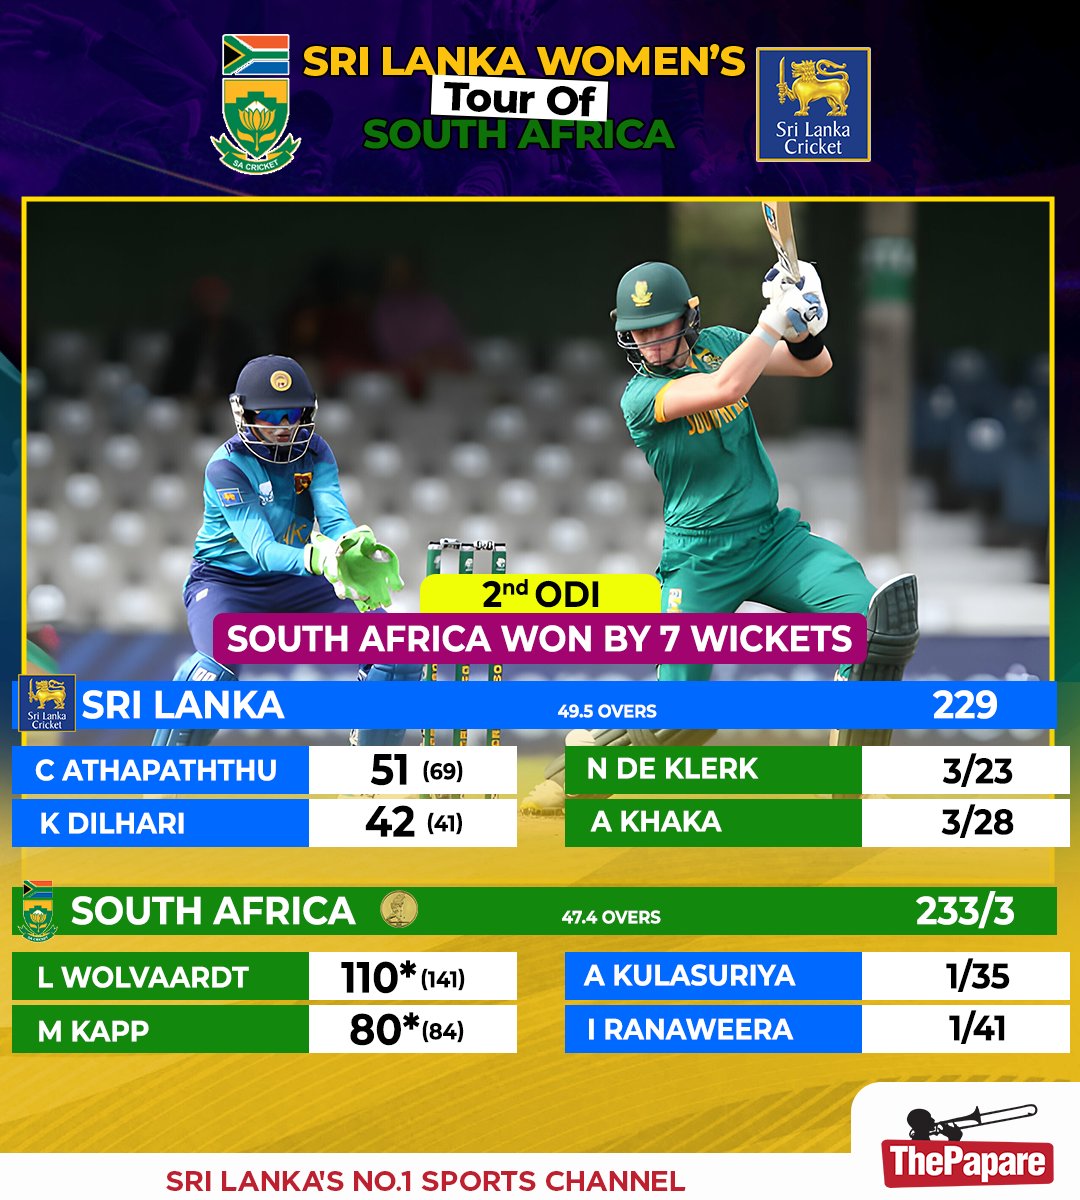 South Africa registered a convincing win over Sri Lanka in the second Women’s ODI of the three-match series at Kimberley.

#WomenCricket #SAvSL

More 👉 bit.ly/TPCricket